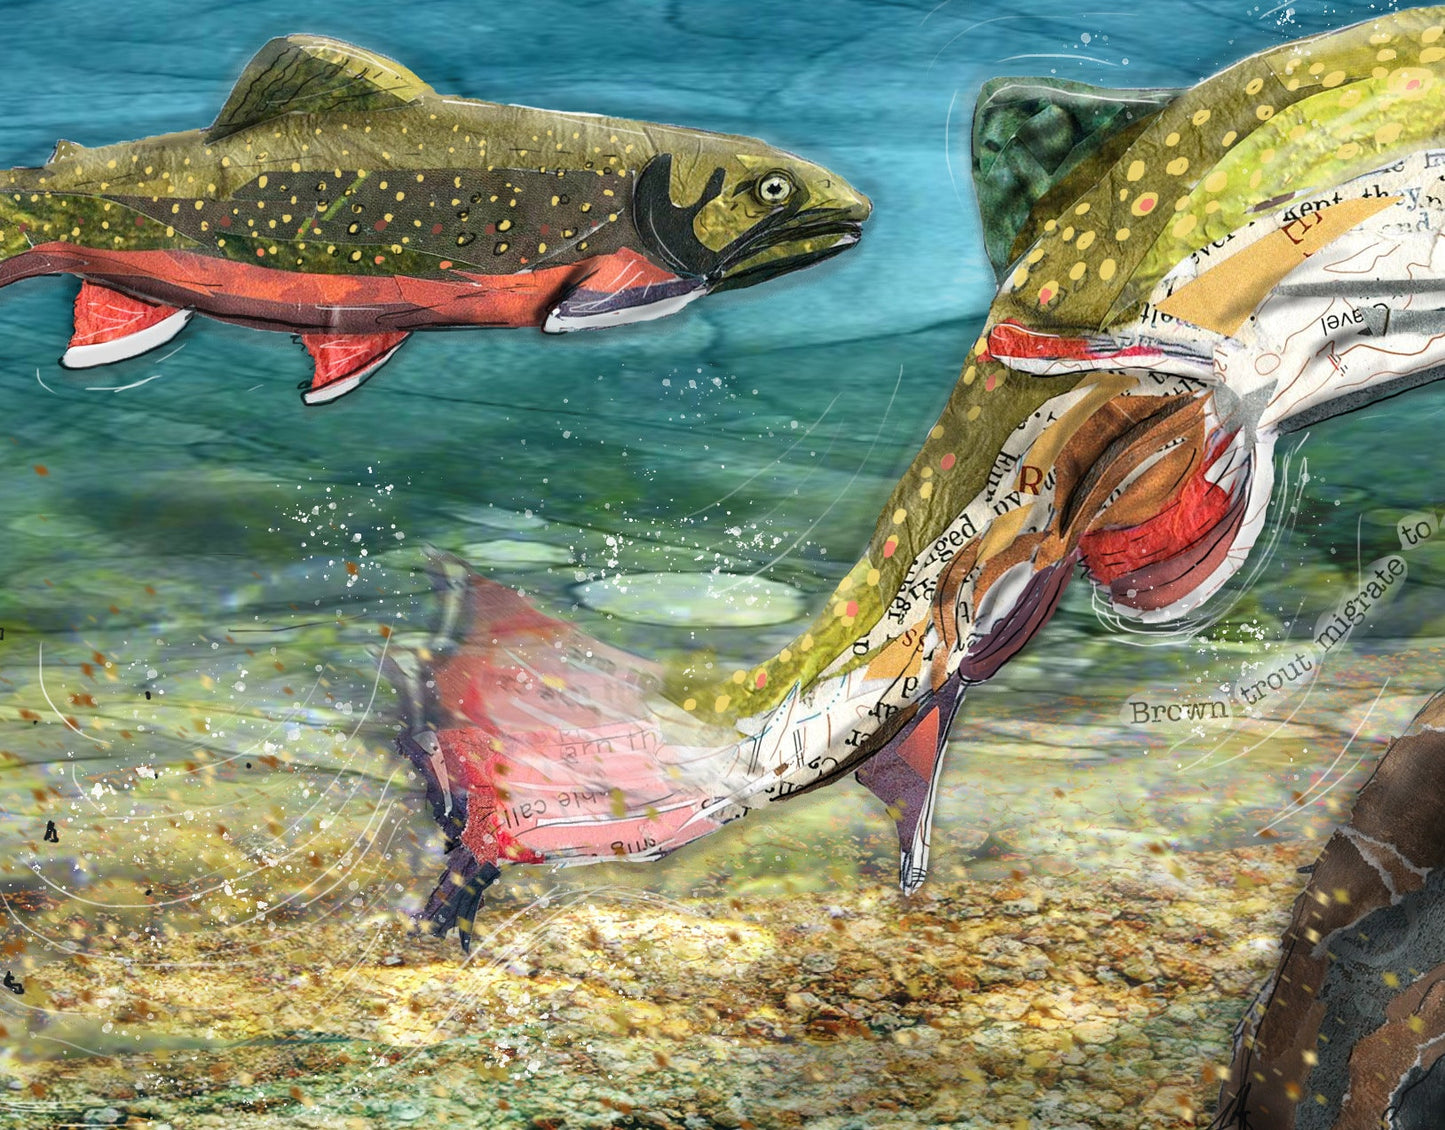 Greeting Card of mixed media collage of brook trout making a redd, Yellowstone - Blank Inside